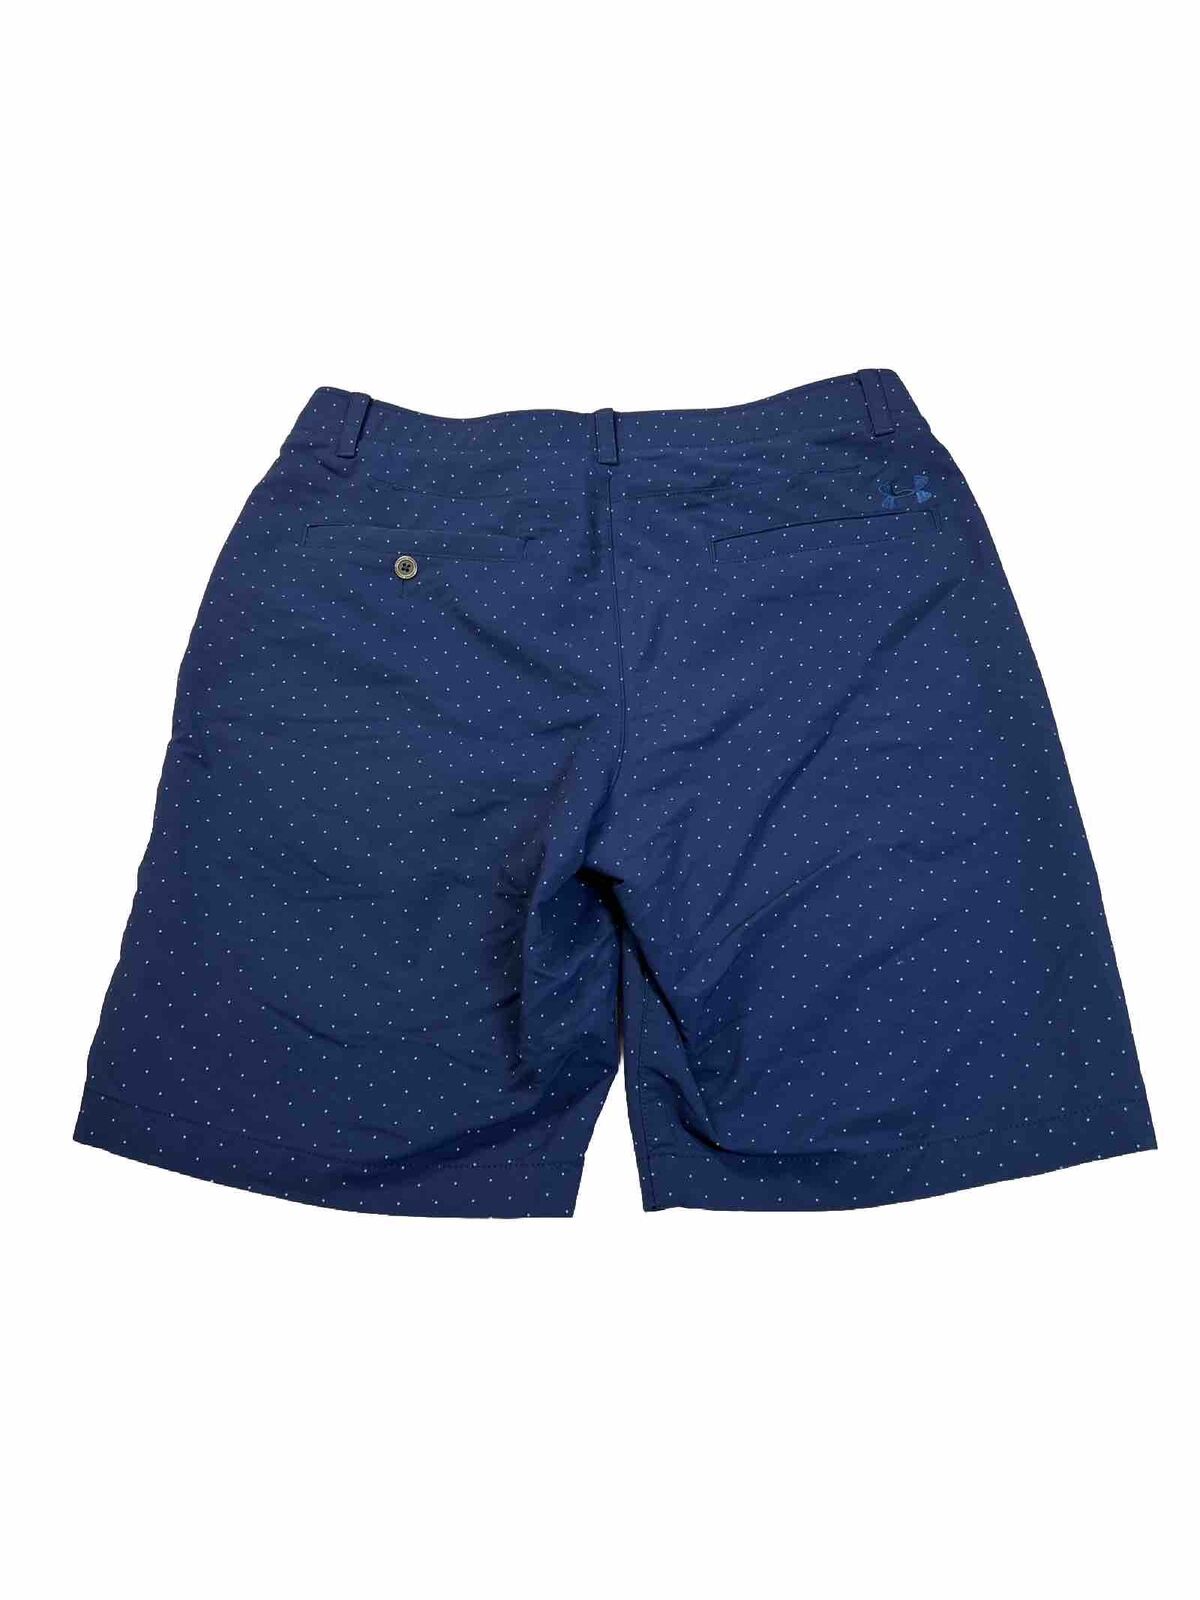 Under Armour Men's Blue Match Play Novelty Athletic Golf Shorts - 34